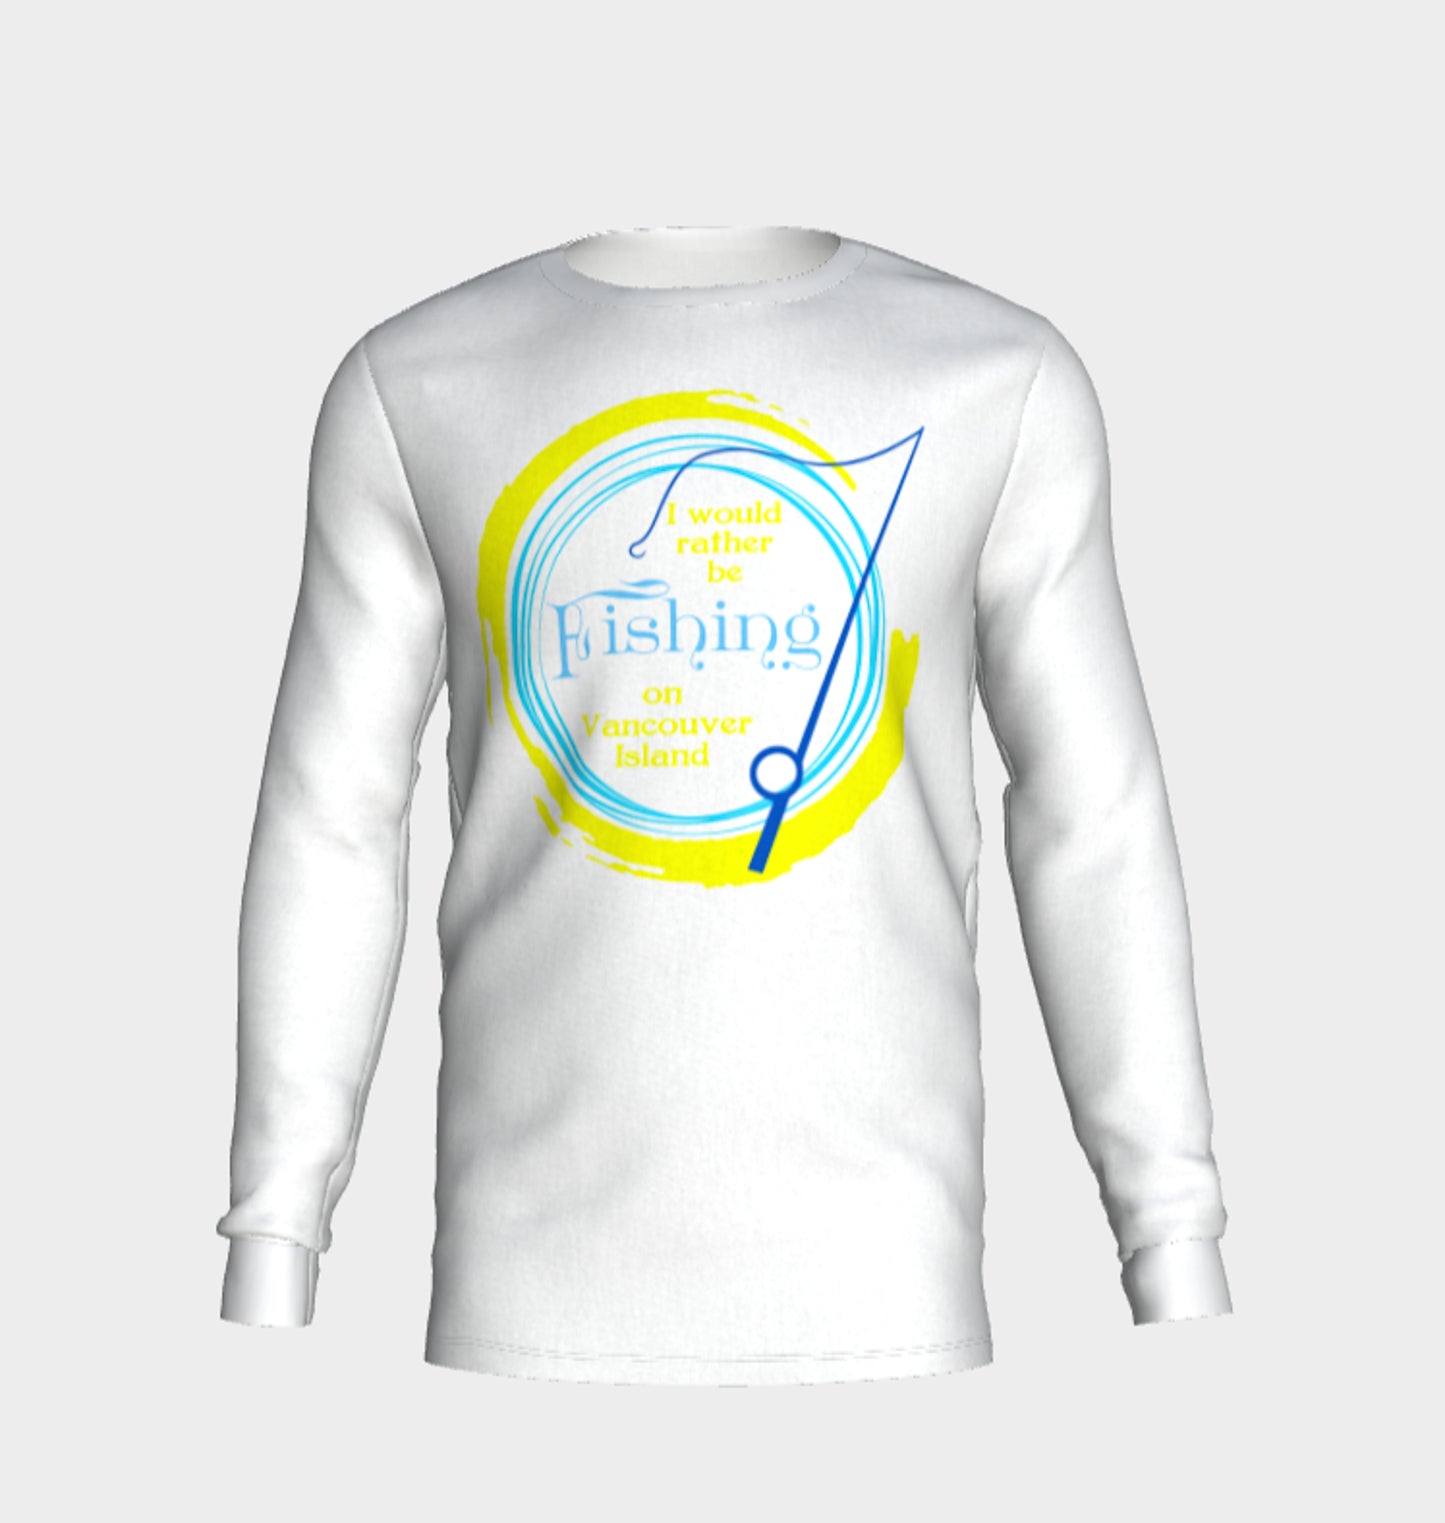 Rather Be Fishing Vancouver Island Long Sleeve Unisex T-Shirt  Features:  Flattering unisex fit Cozy long sleeves Crew neck Made with Milltex lightweight fabric Sizes small to 2XL